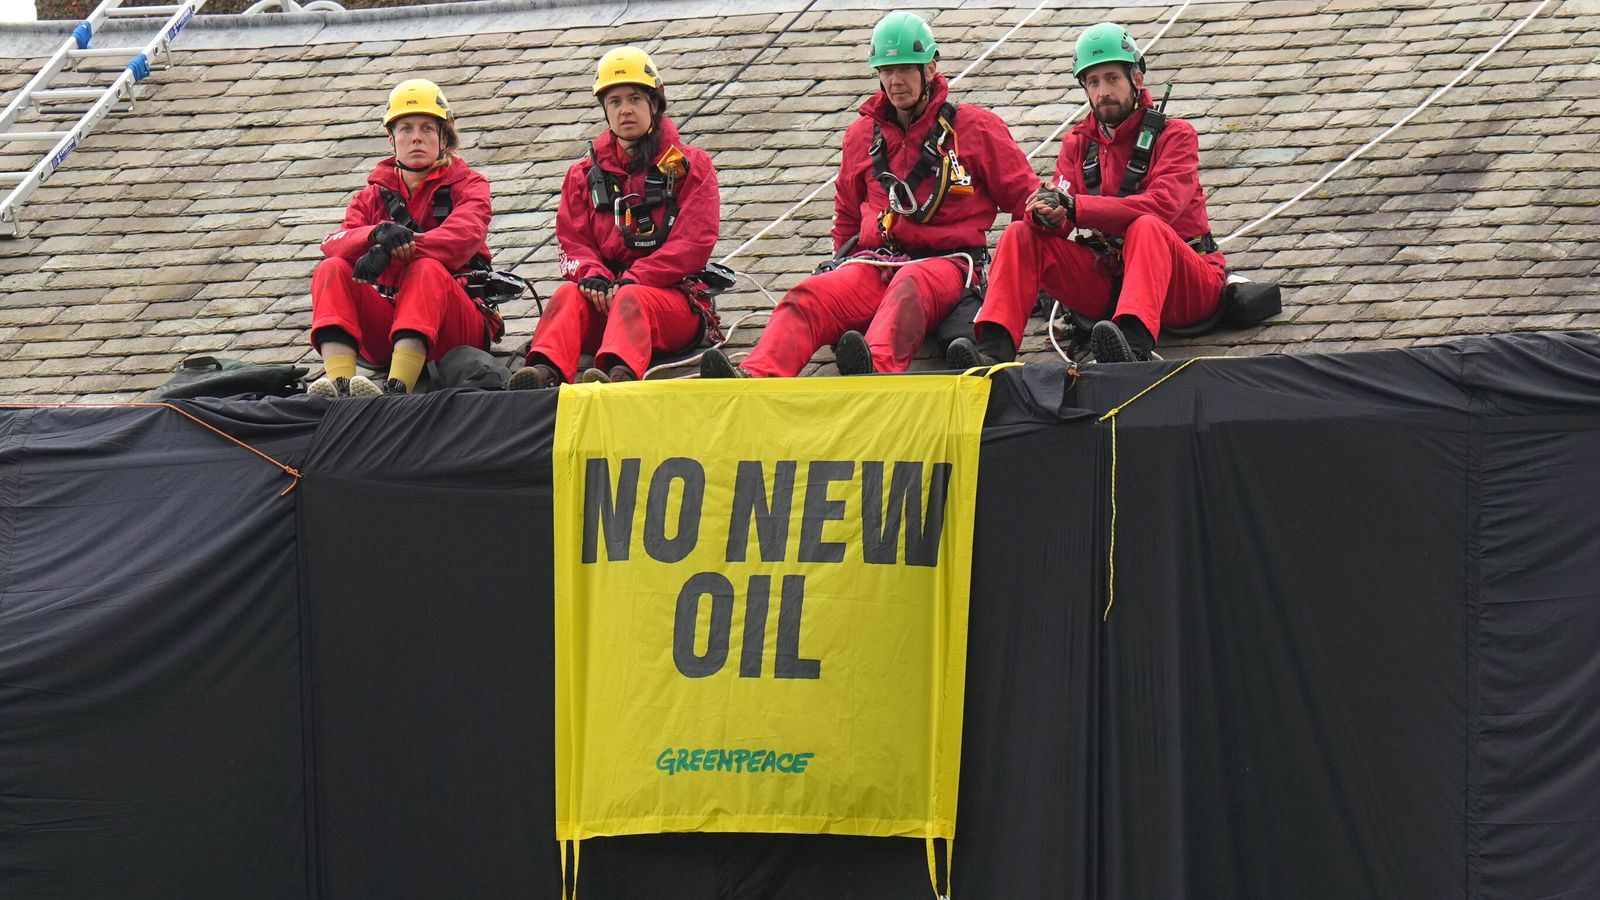 Greenpeace activists released on bail after scaling roof of Rishi Sunak's North Yorkshire home